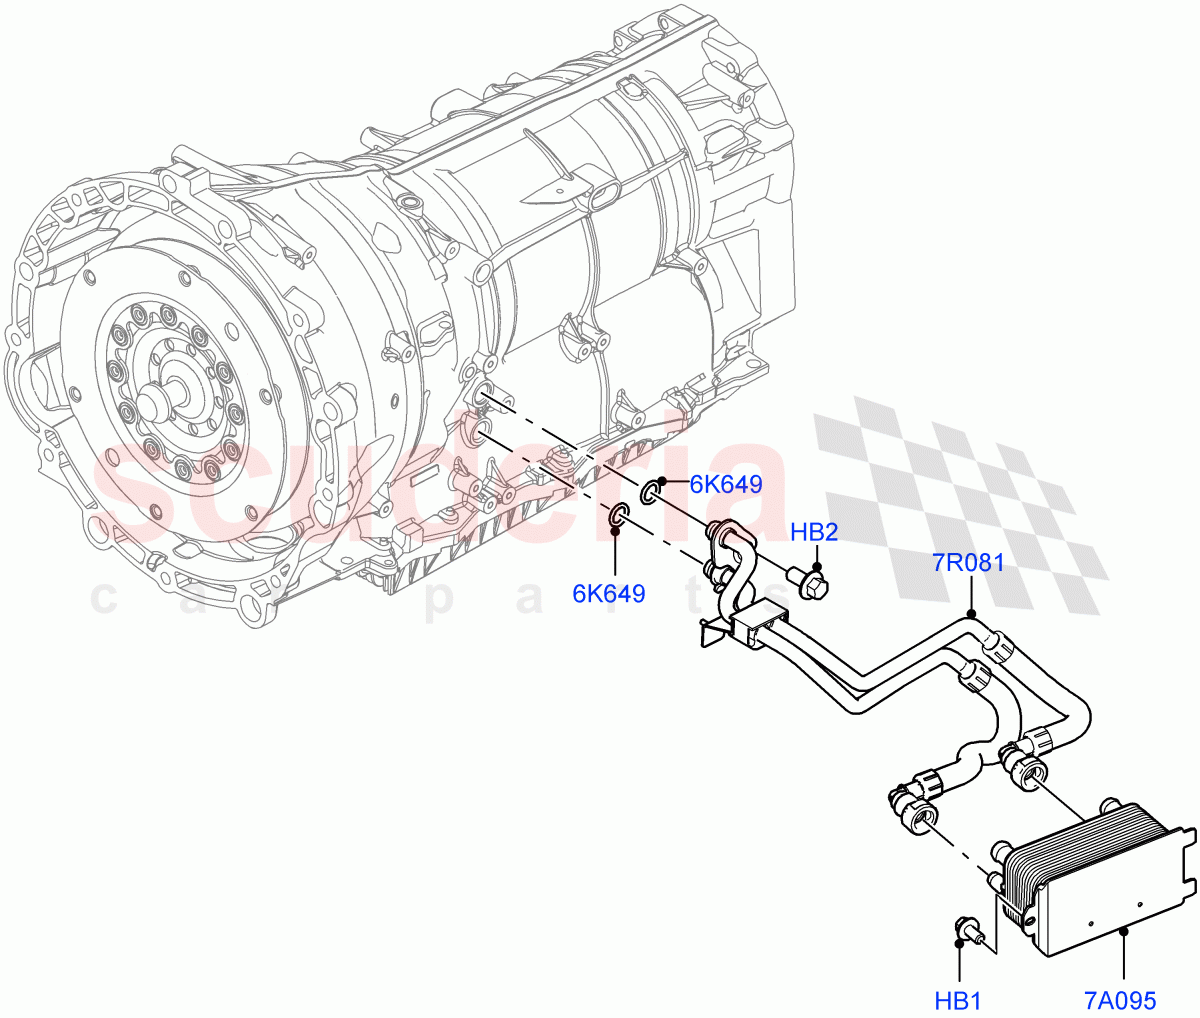 Transmission Cooling Systems(3.0L AJ20P6 Petrol High,8 Speed Auto Trans ZF 8HP76,3.0L AJ20D6 Diesel High)((V)FROMKA000001) of Land Rover Land Rover Range Rover Sport (2014+) [2.0 Turbo Petrol GTDI]